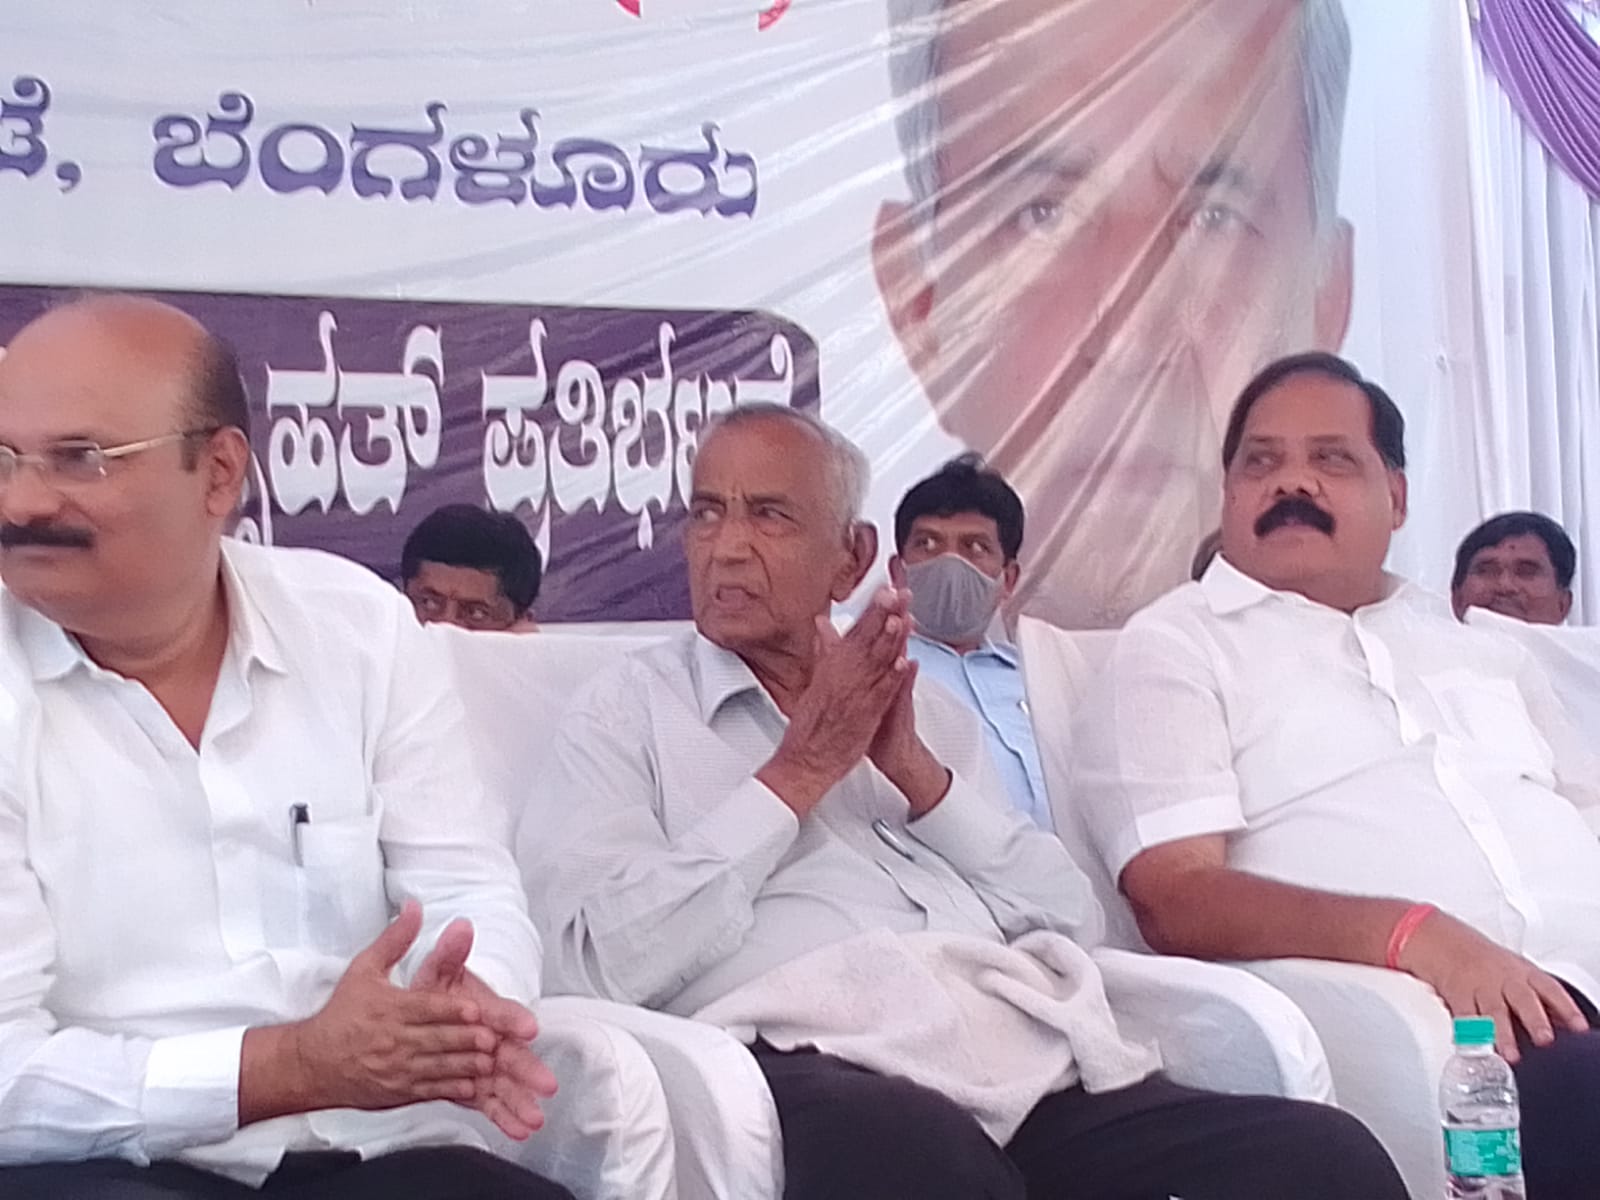 Karnataka State Contractors' Association President D Kempanna in the middle with folded hands